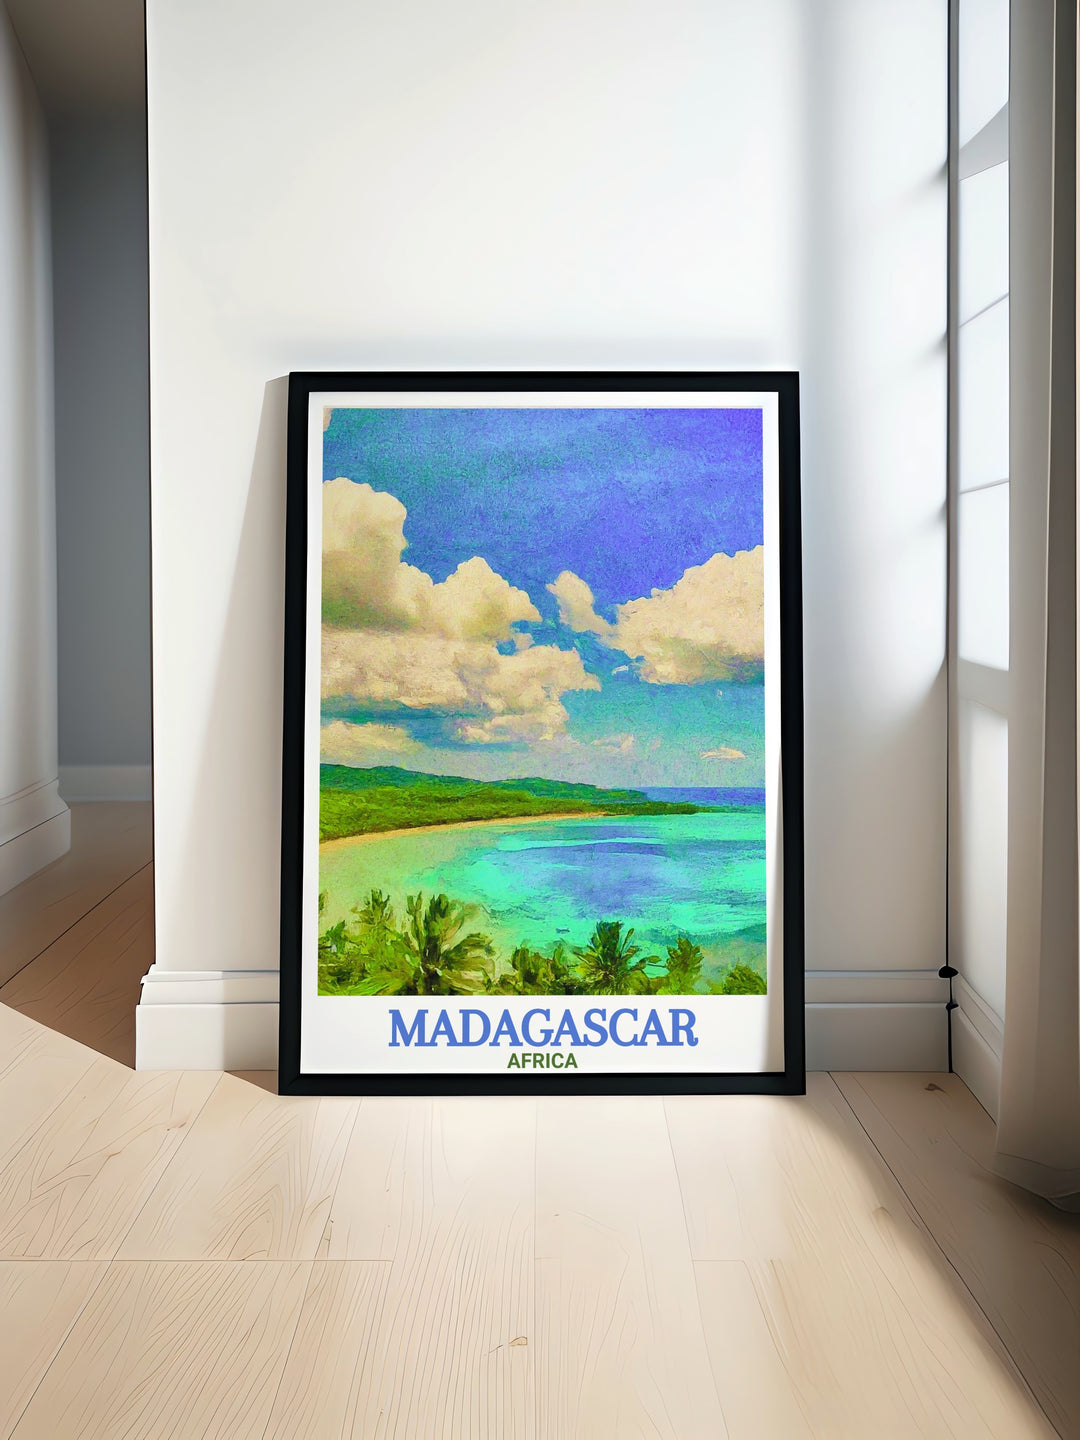 Nosy Be travel poster featuring the stunning landscapes of Madagascar perfect for Africa wall art and home decor ideal for adding a touch of exotic beauty to any room suitable for travel enthusiasts and art lovers looking for unique wall decor